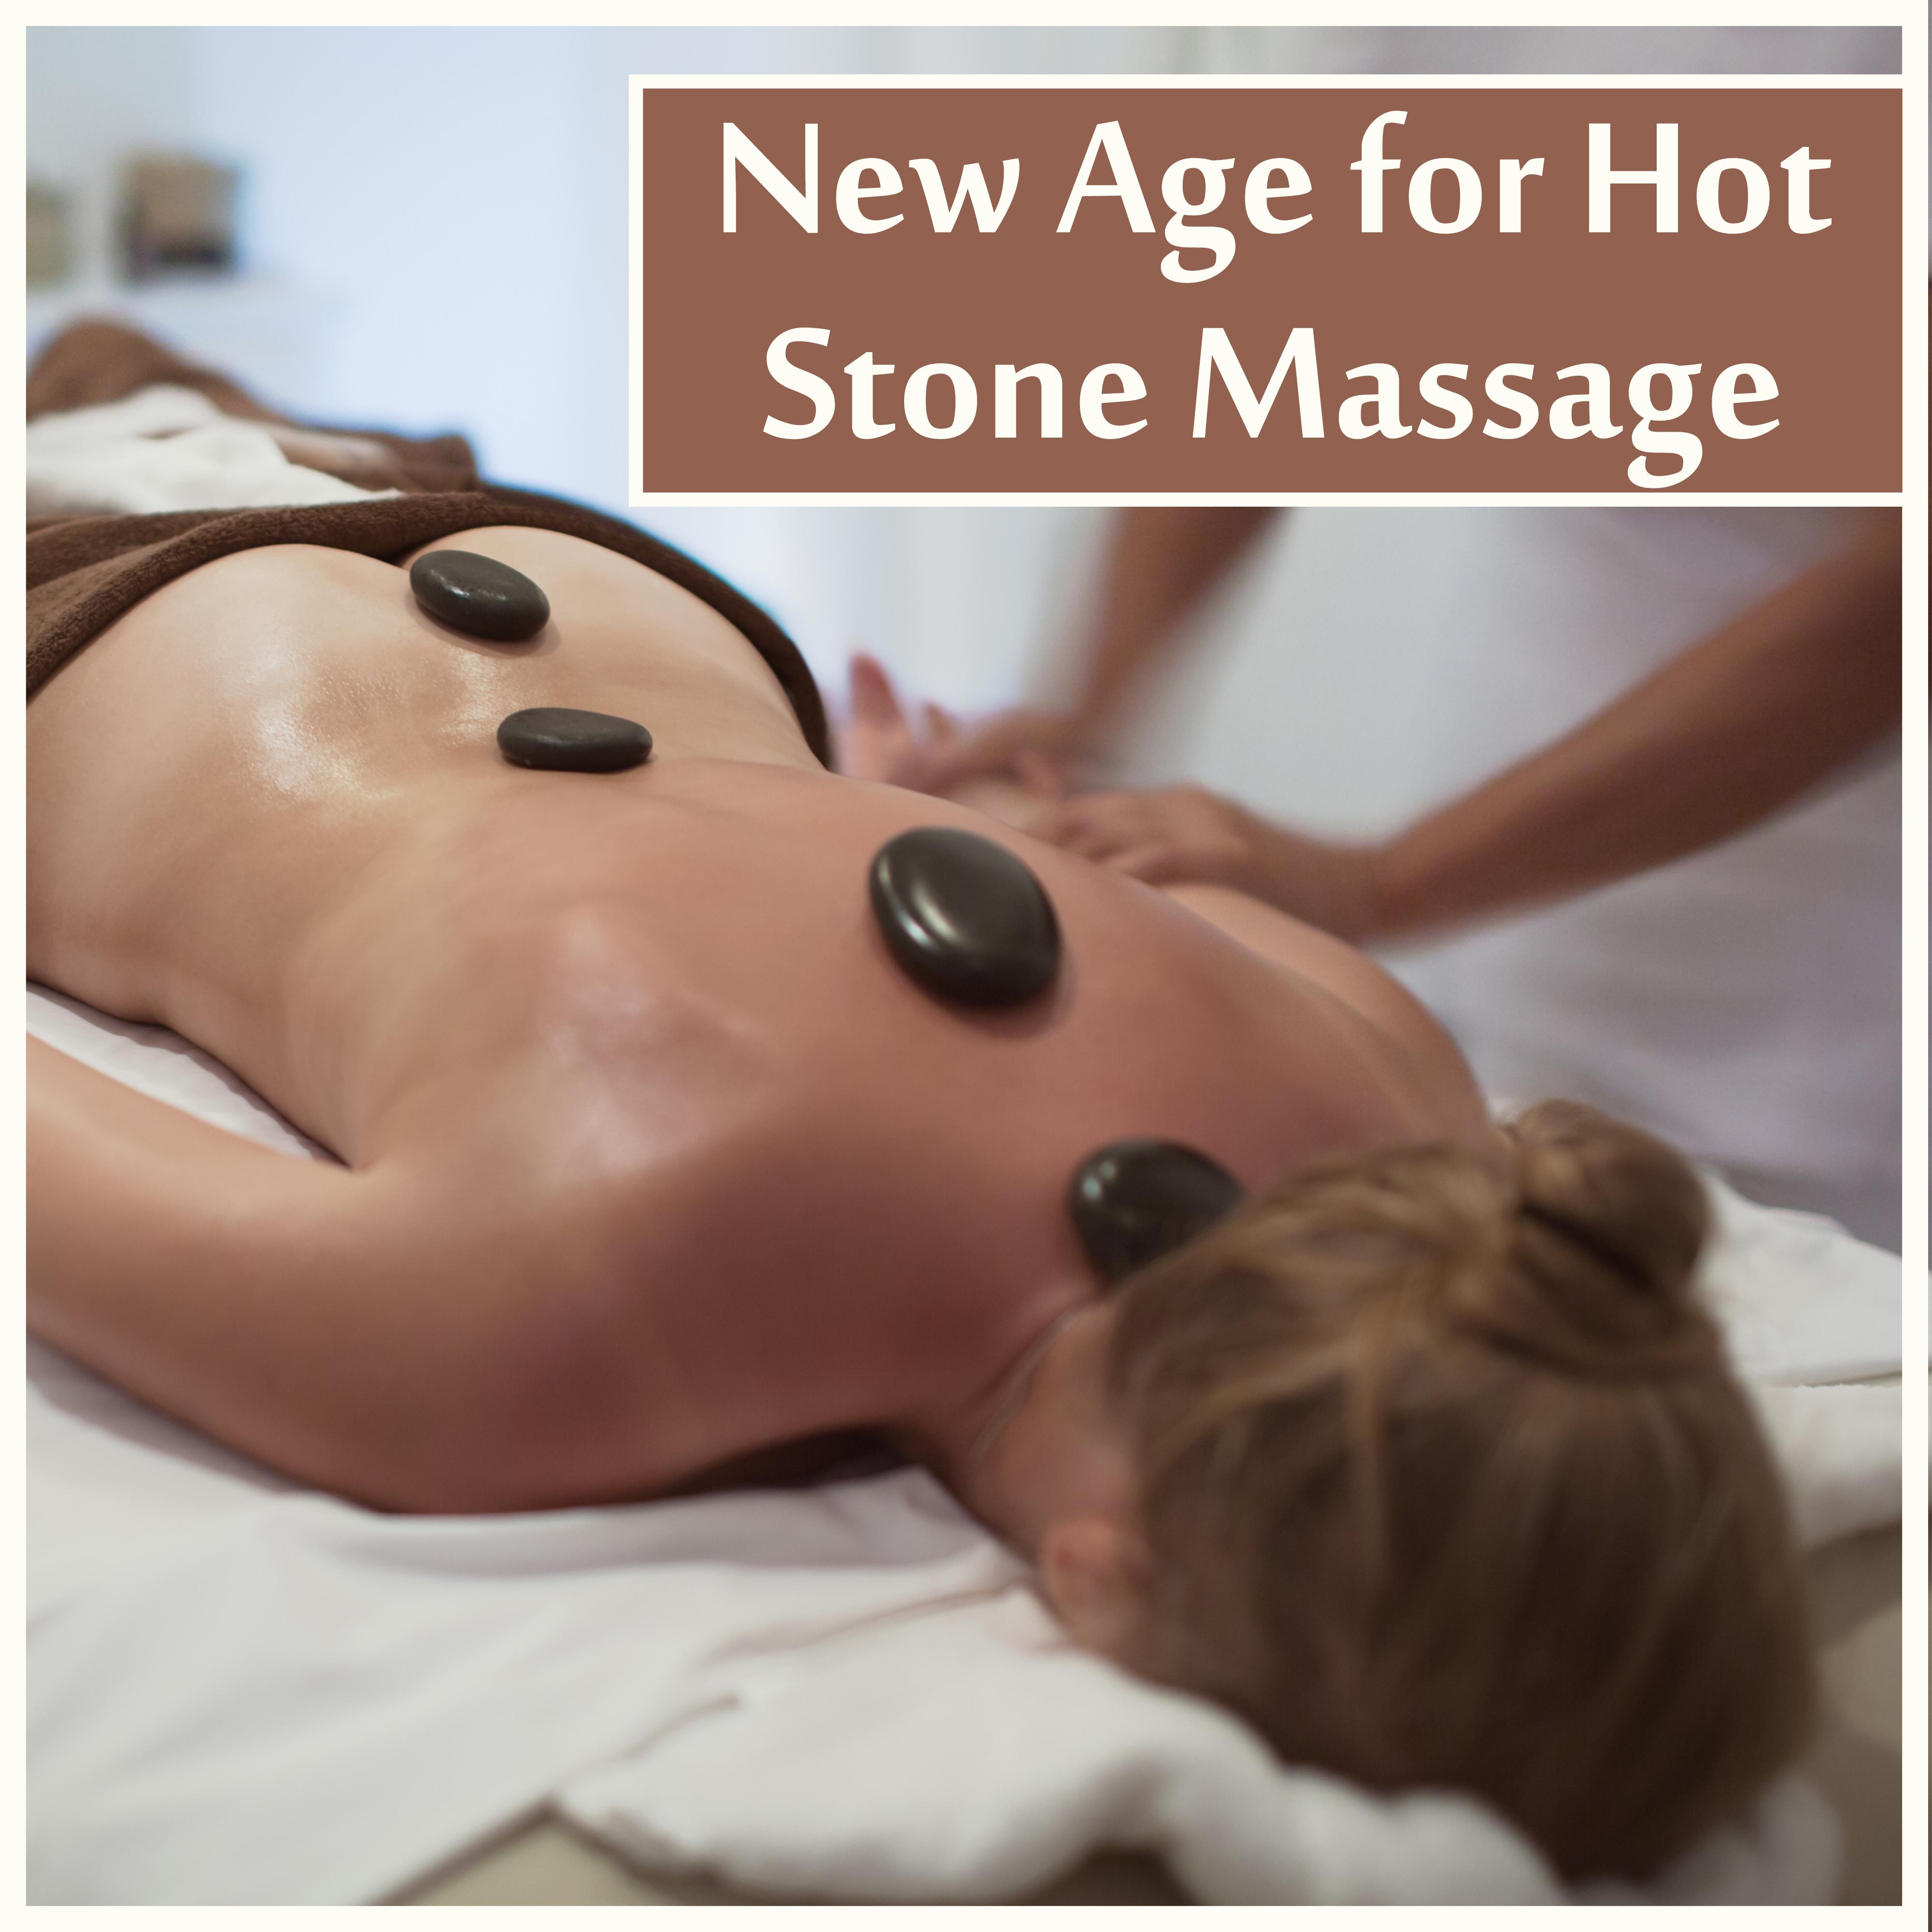 New Age for Hot Stone Massage